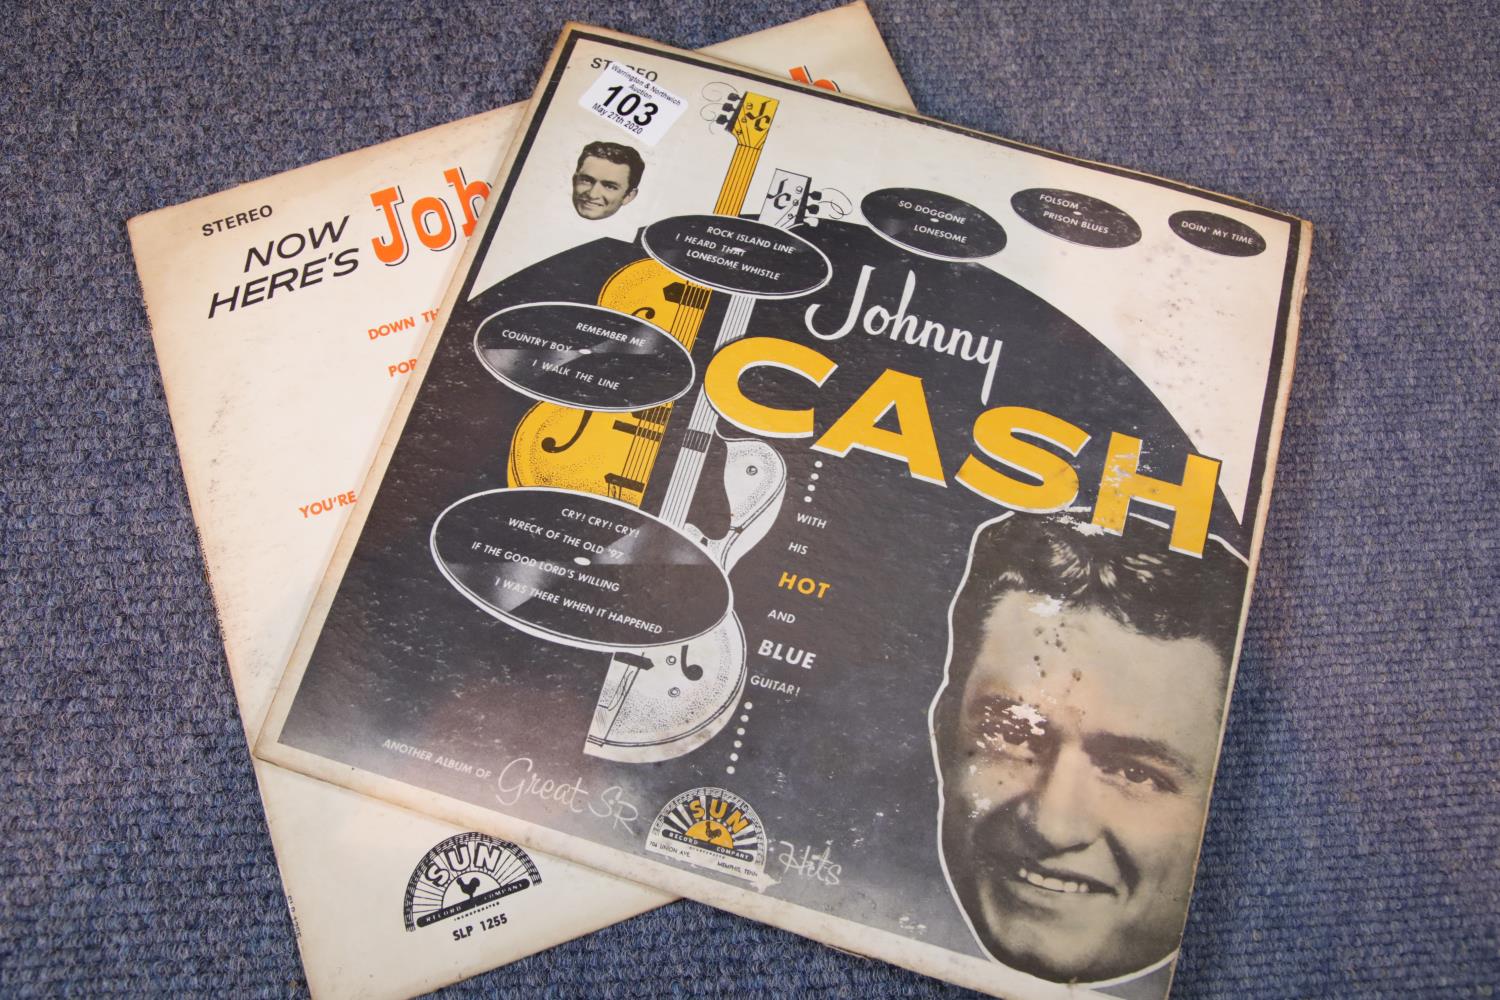 Two Johnny Cash LPs on Sun Record labels Now Here's Johnny Cash and Johnny Cash with His Hot and